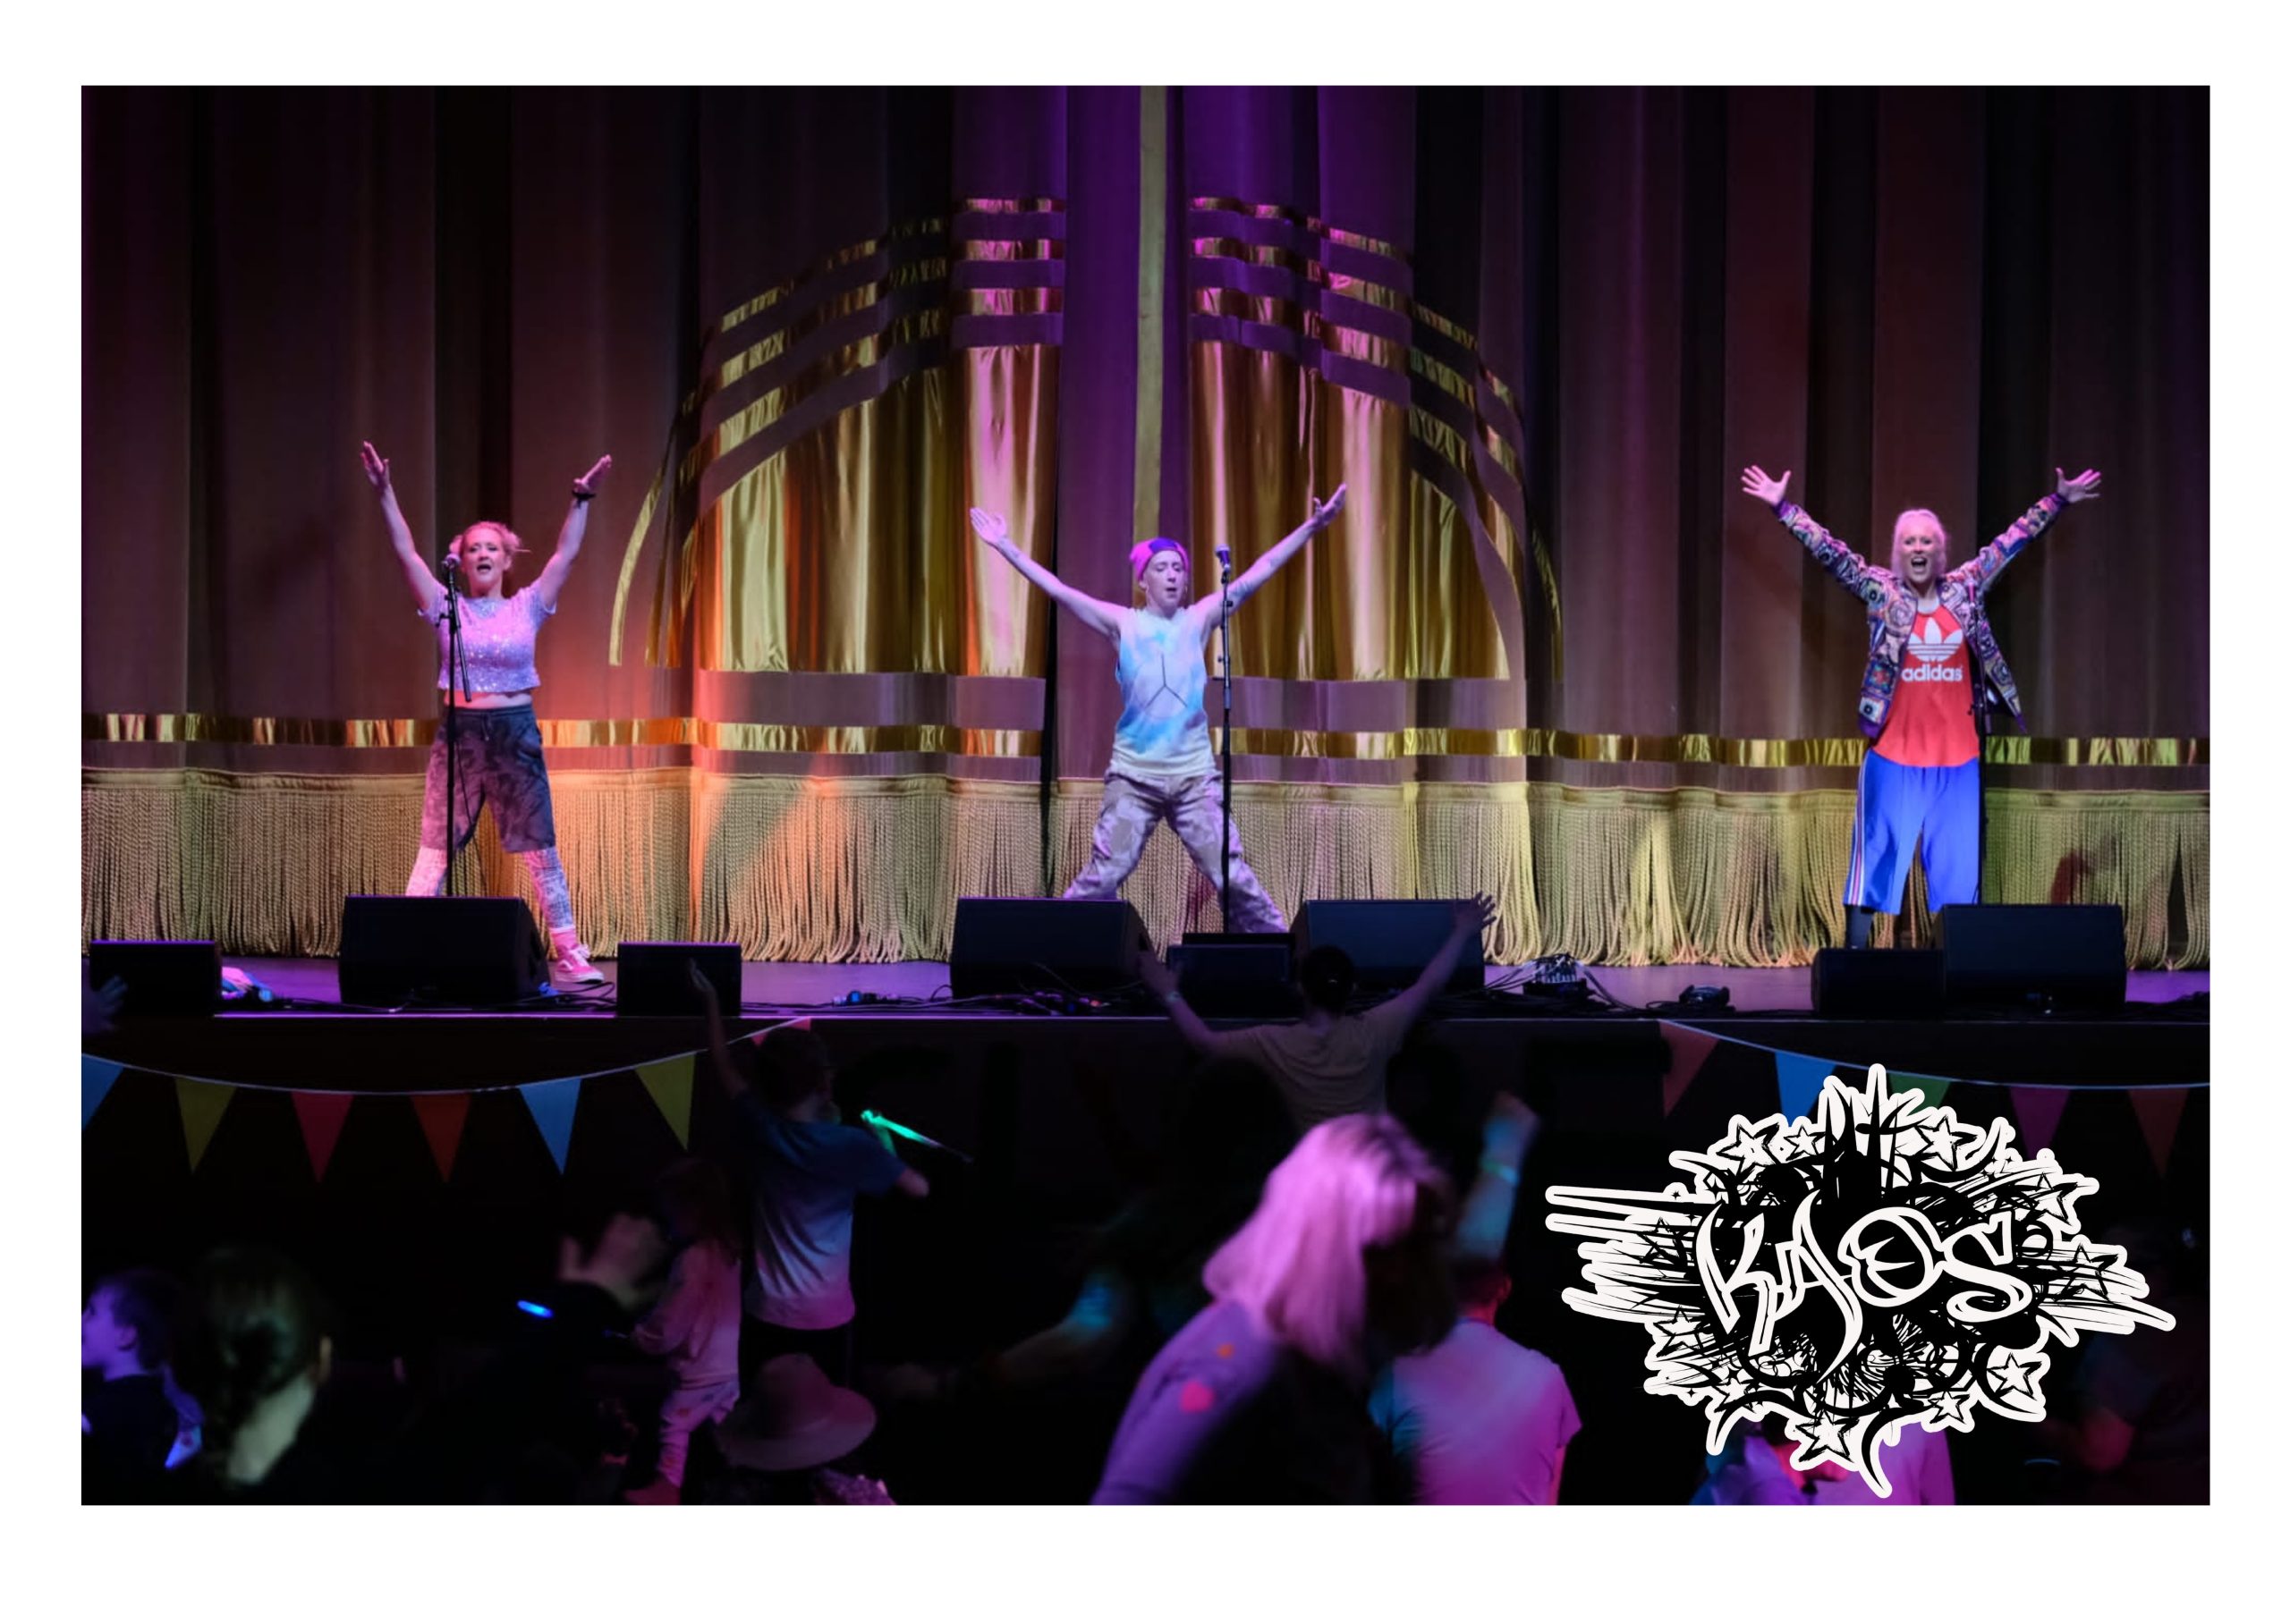 Three of the Urban Kaos team on stage, they each have both arms raised in a V shape, and all have microphone stands in front of them. There is a crowd dancing in front of them, and a shining gold curtain behind them.